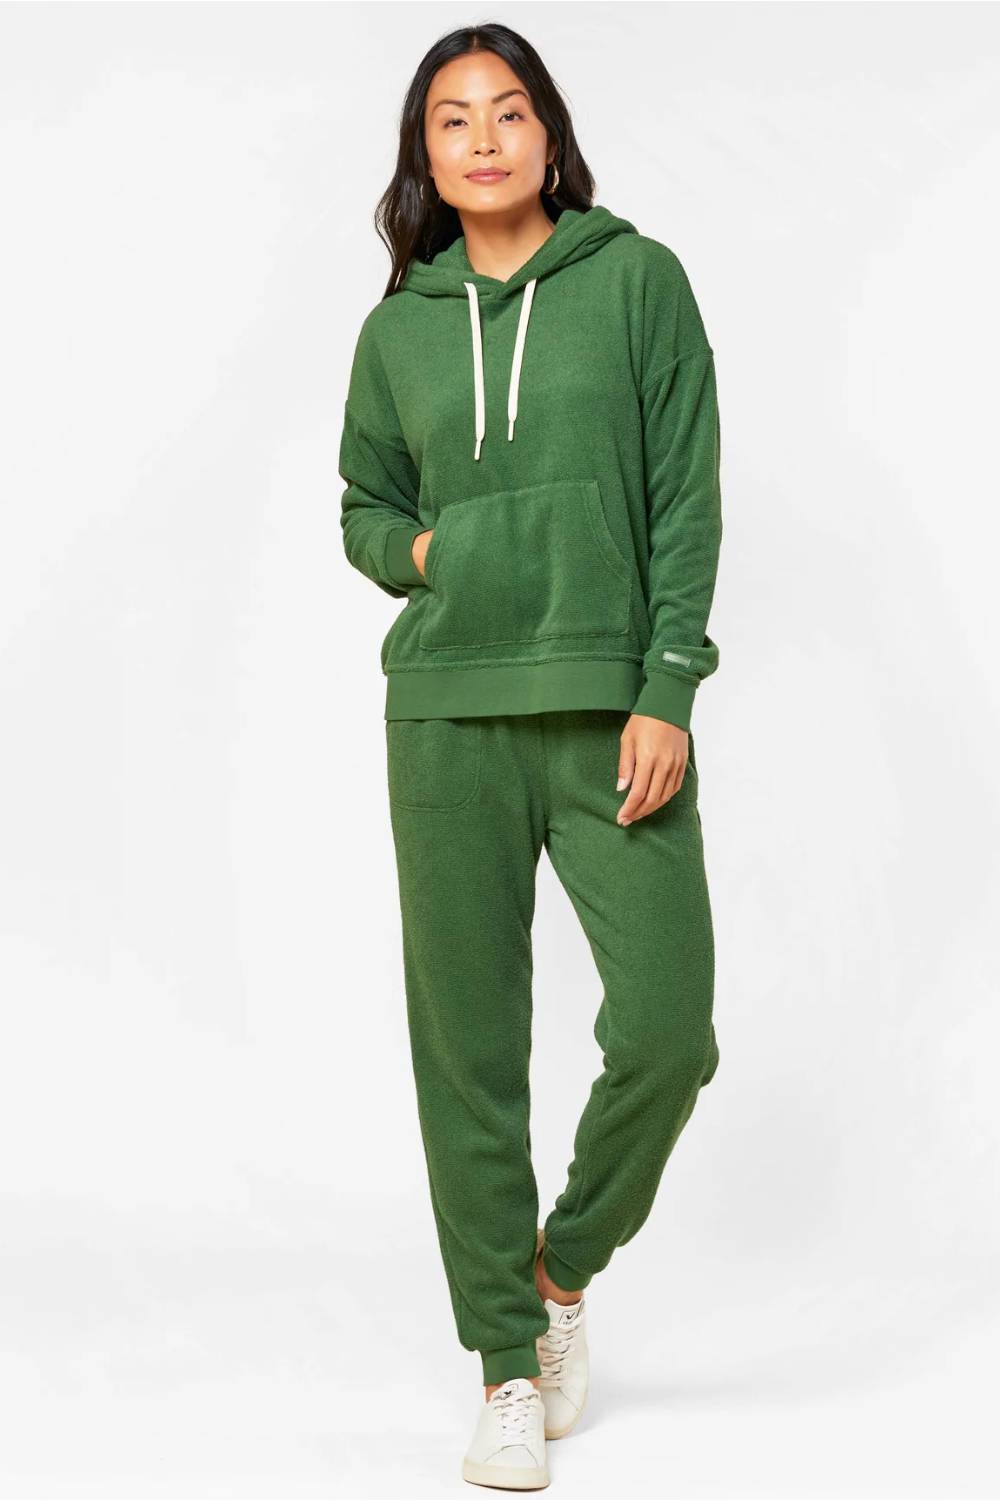 12 Best Recycled Hoodies And Sweatshirts You'll Love | Panaprium